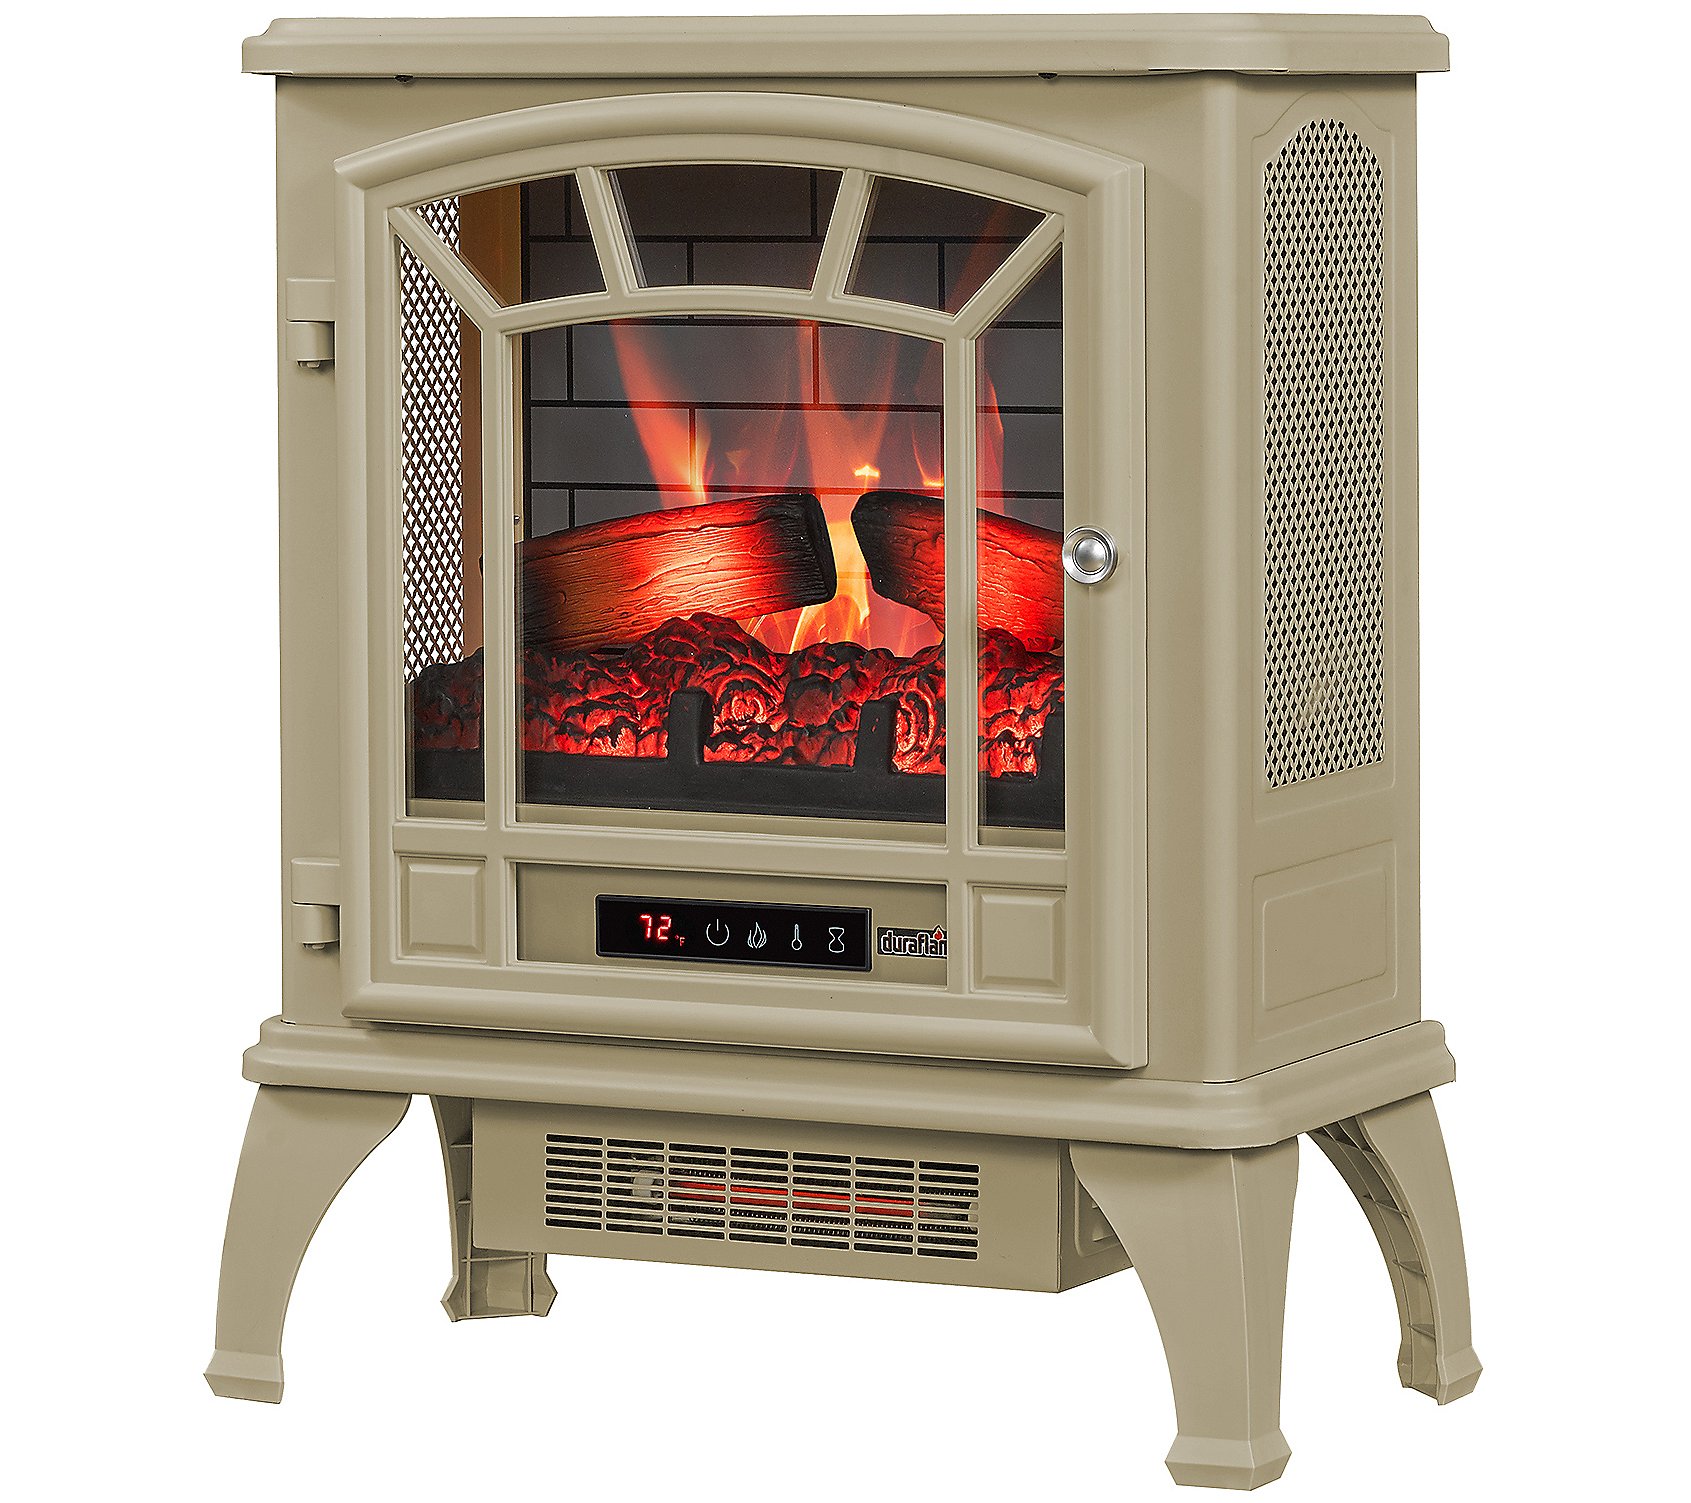 Duraflame Infrared Stove Heater with Remote and 3D Flame Effect